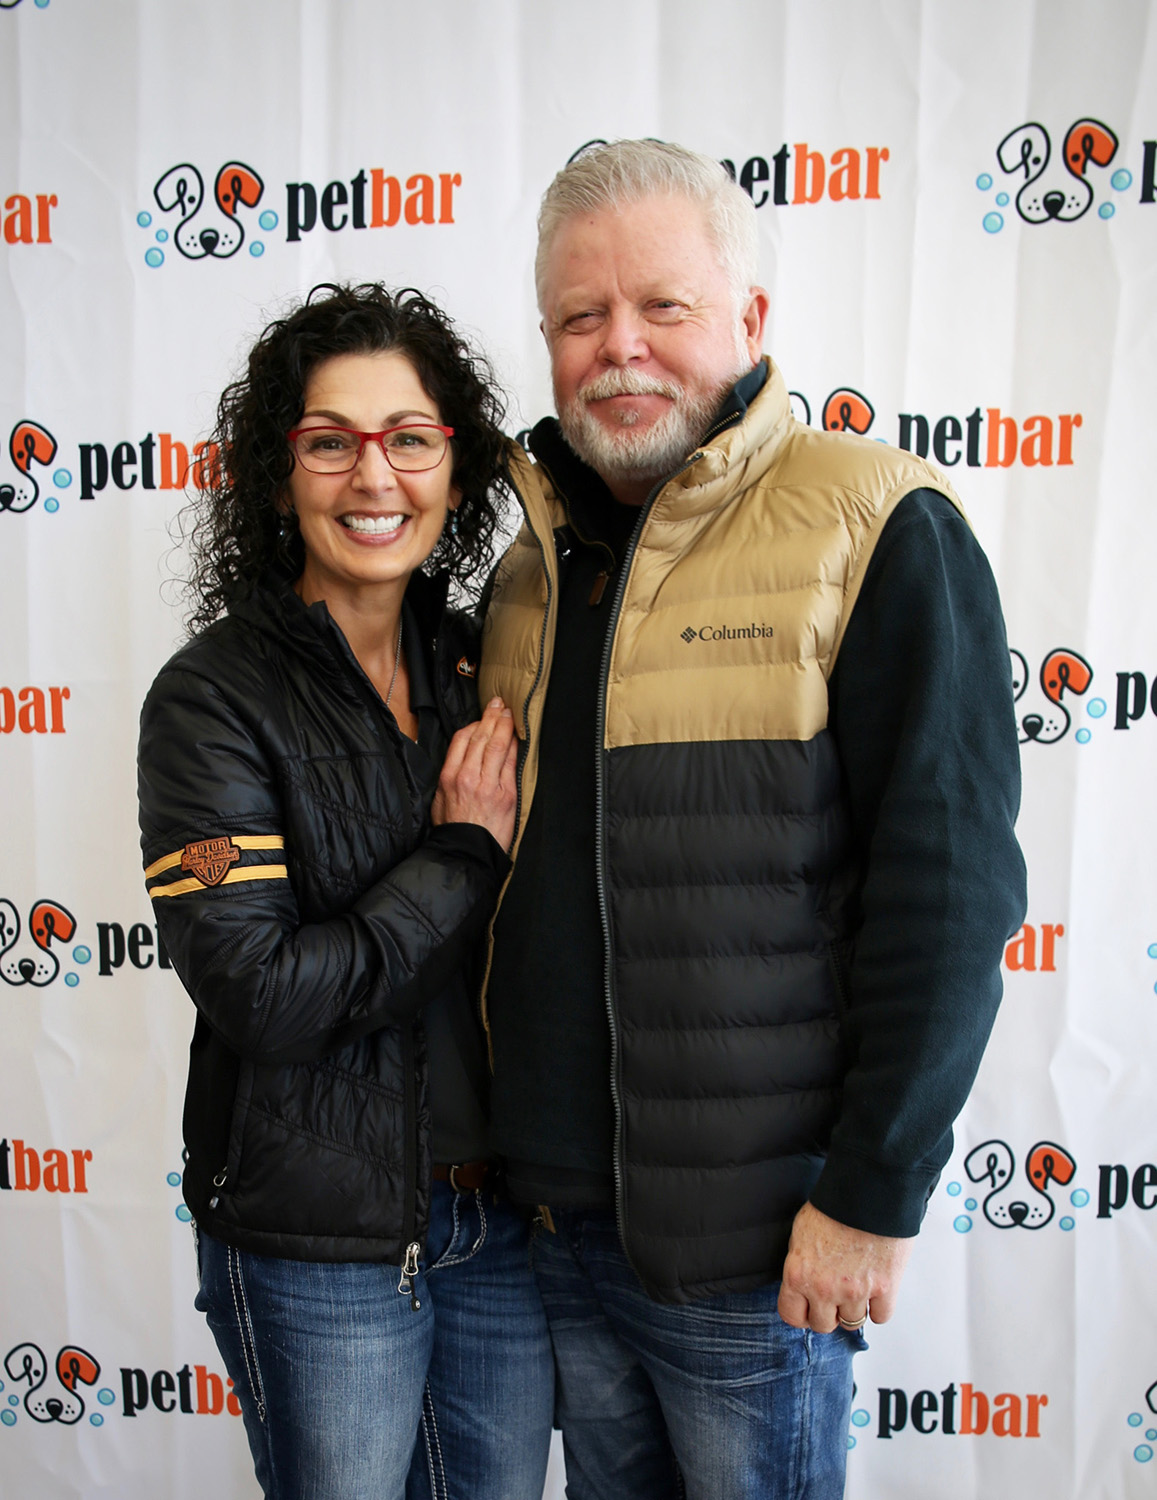 Couple at petbar franchise opening